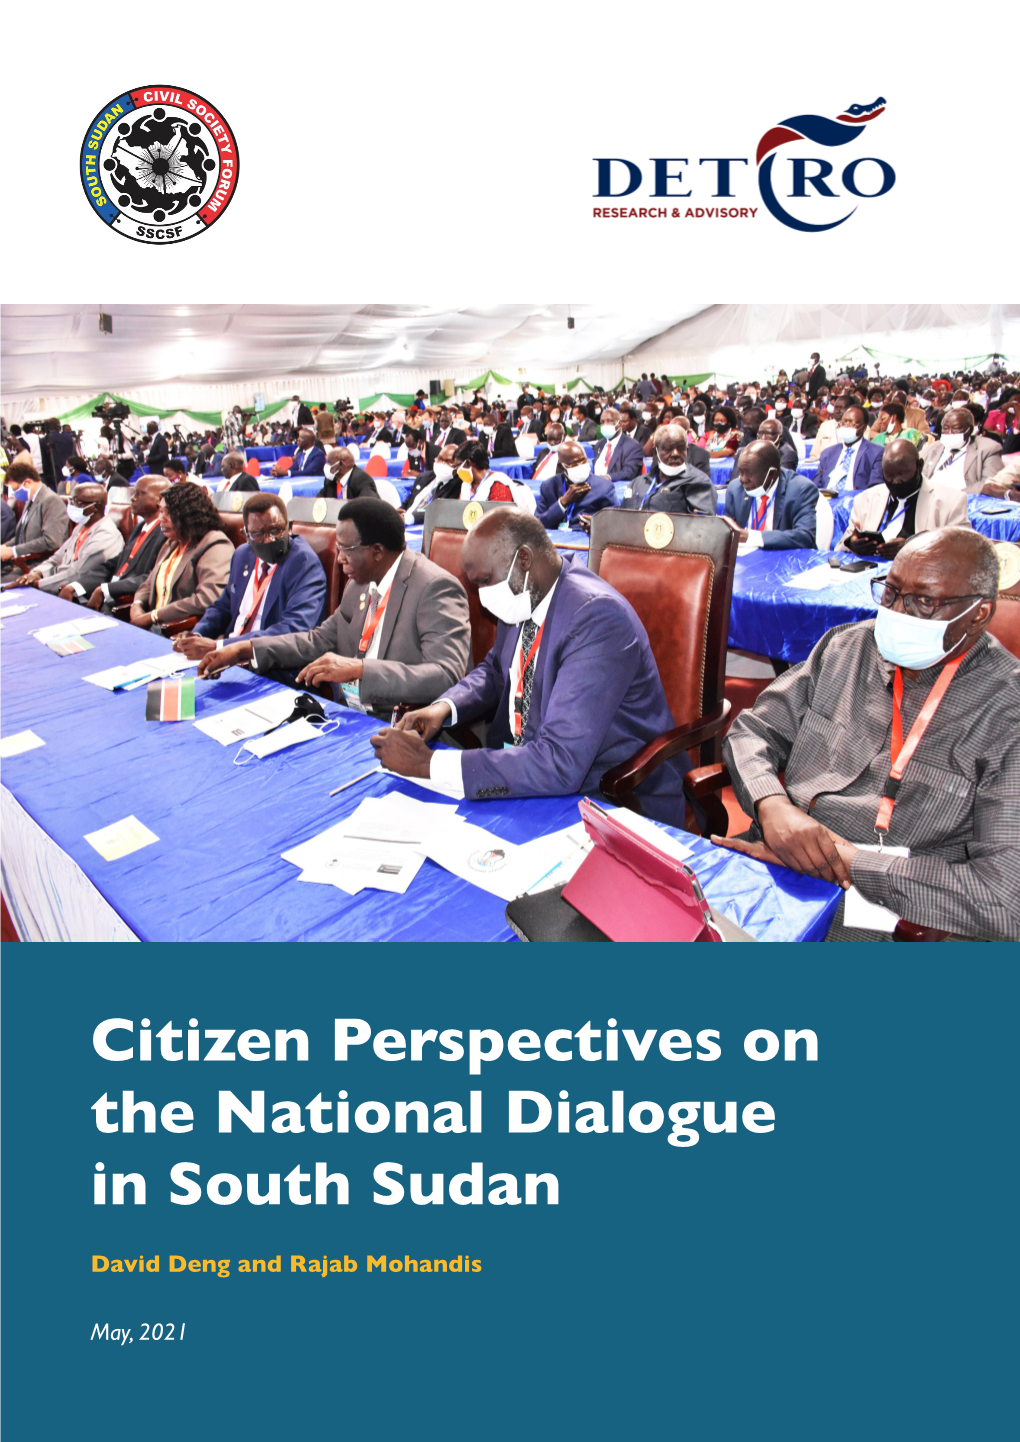 Citizen Perspectives on the National Dialogue in South Sudan